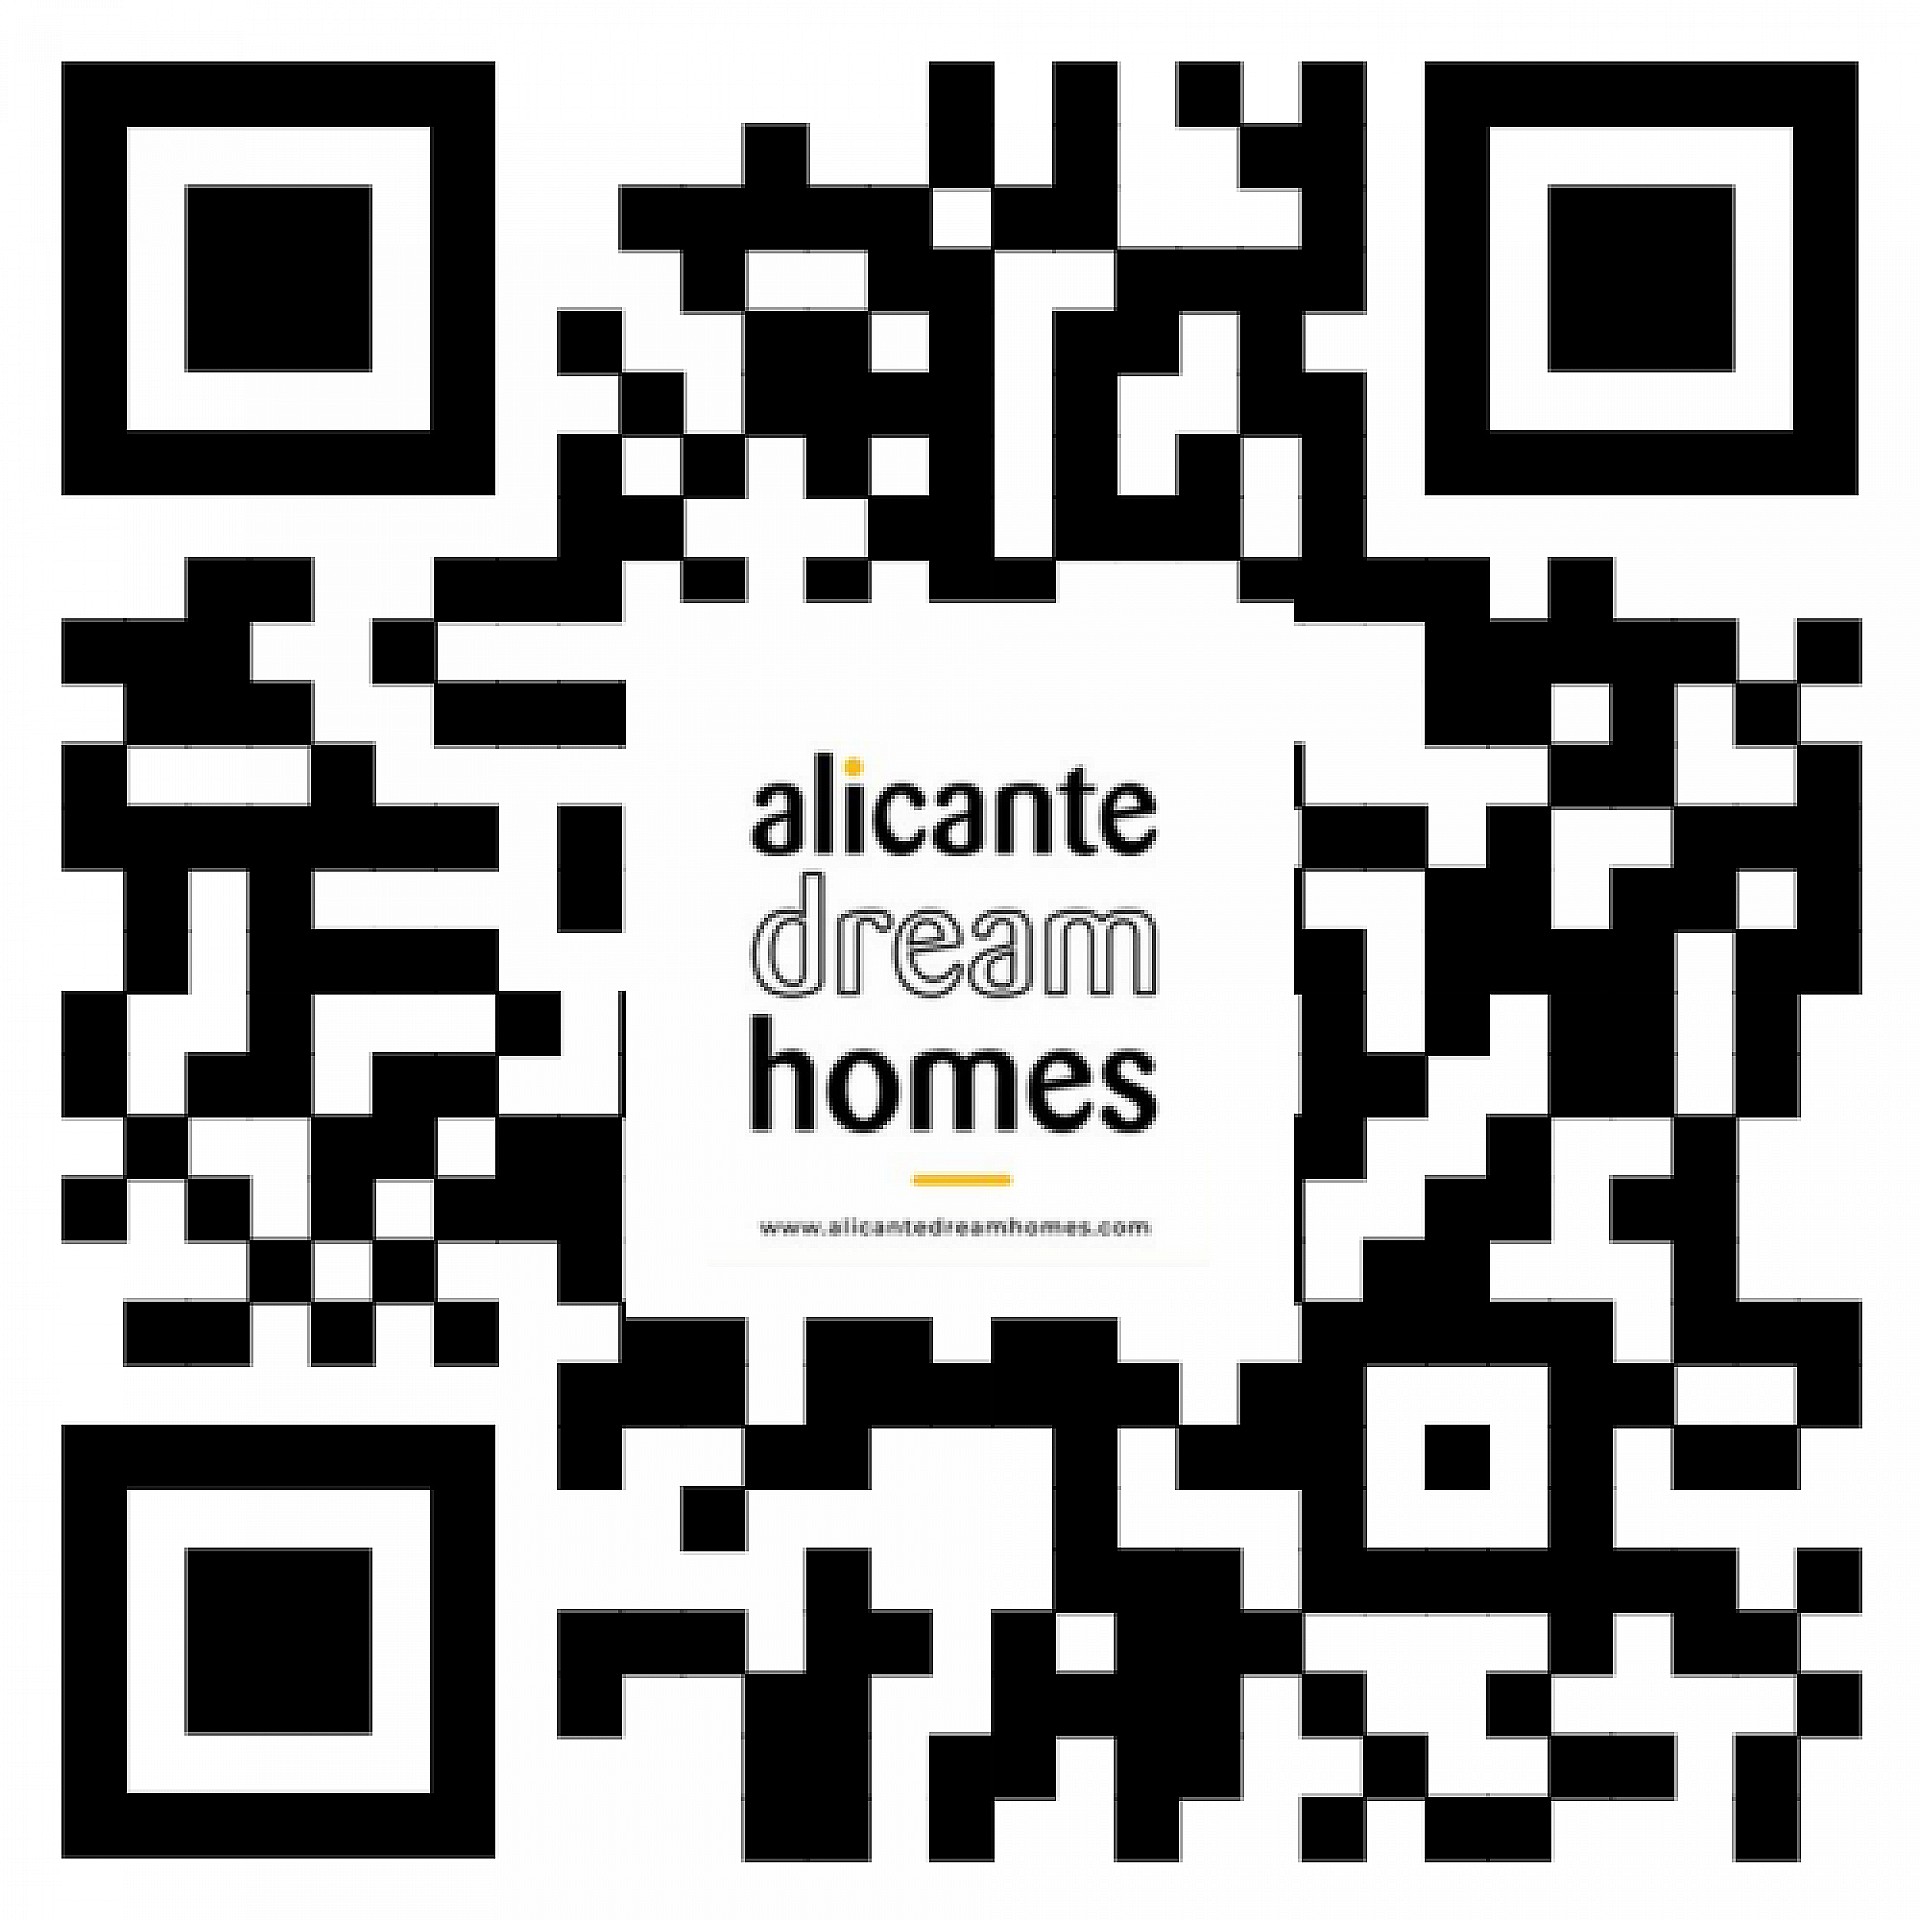 Countryhome for sale in Alicante 45